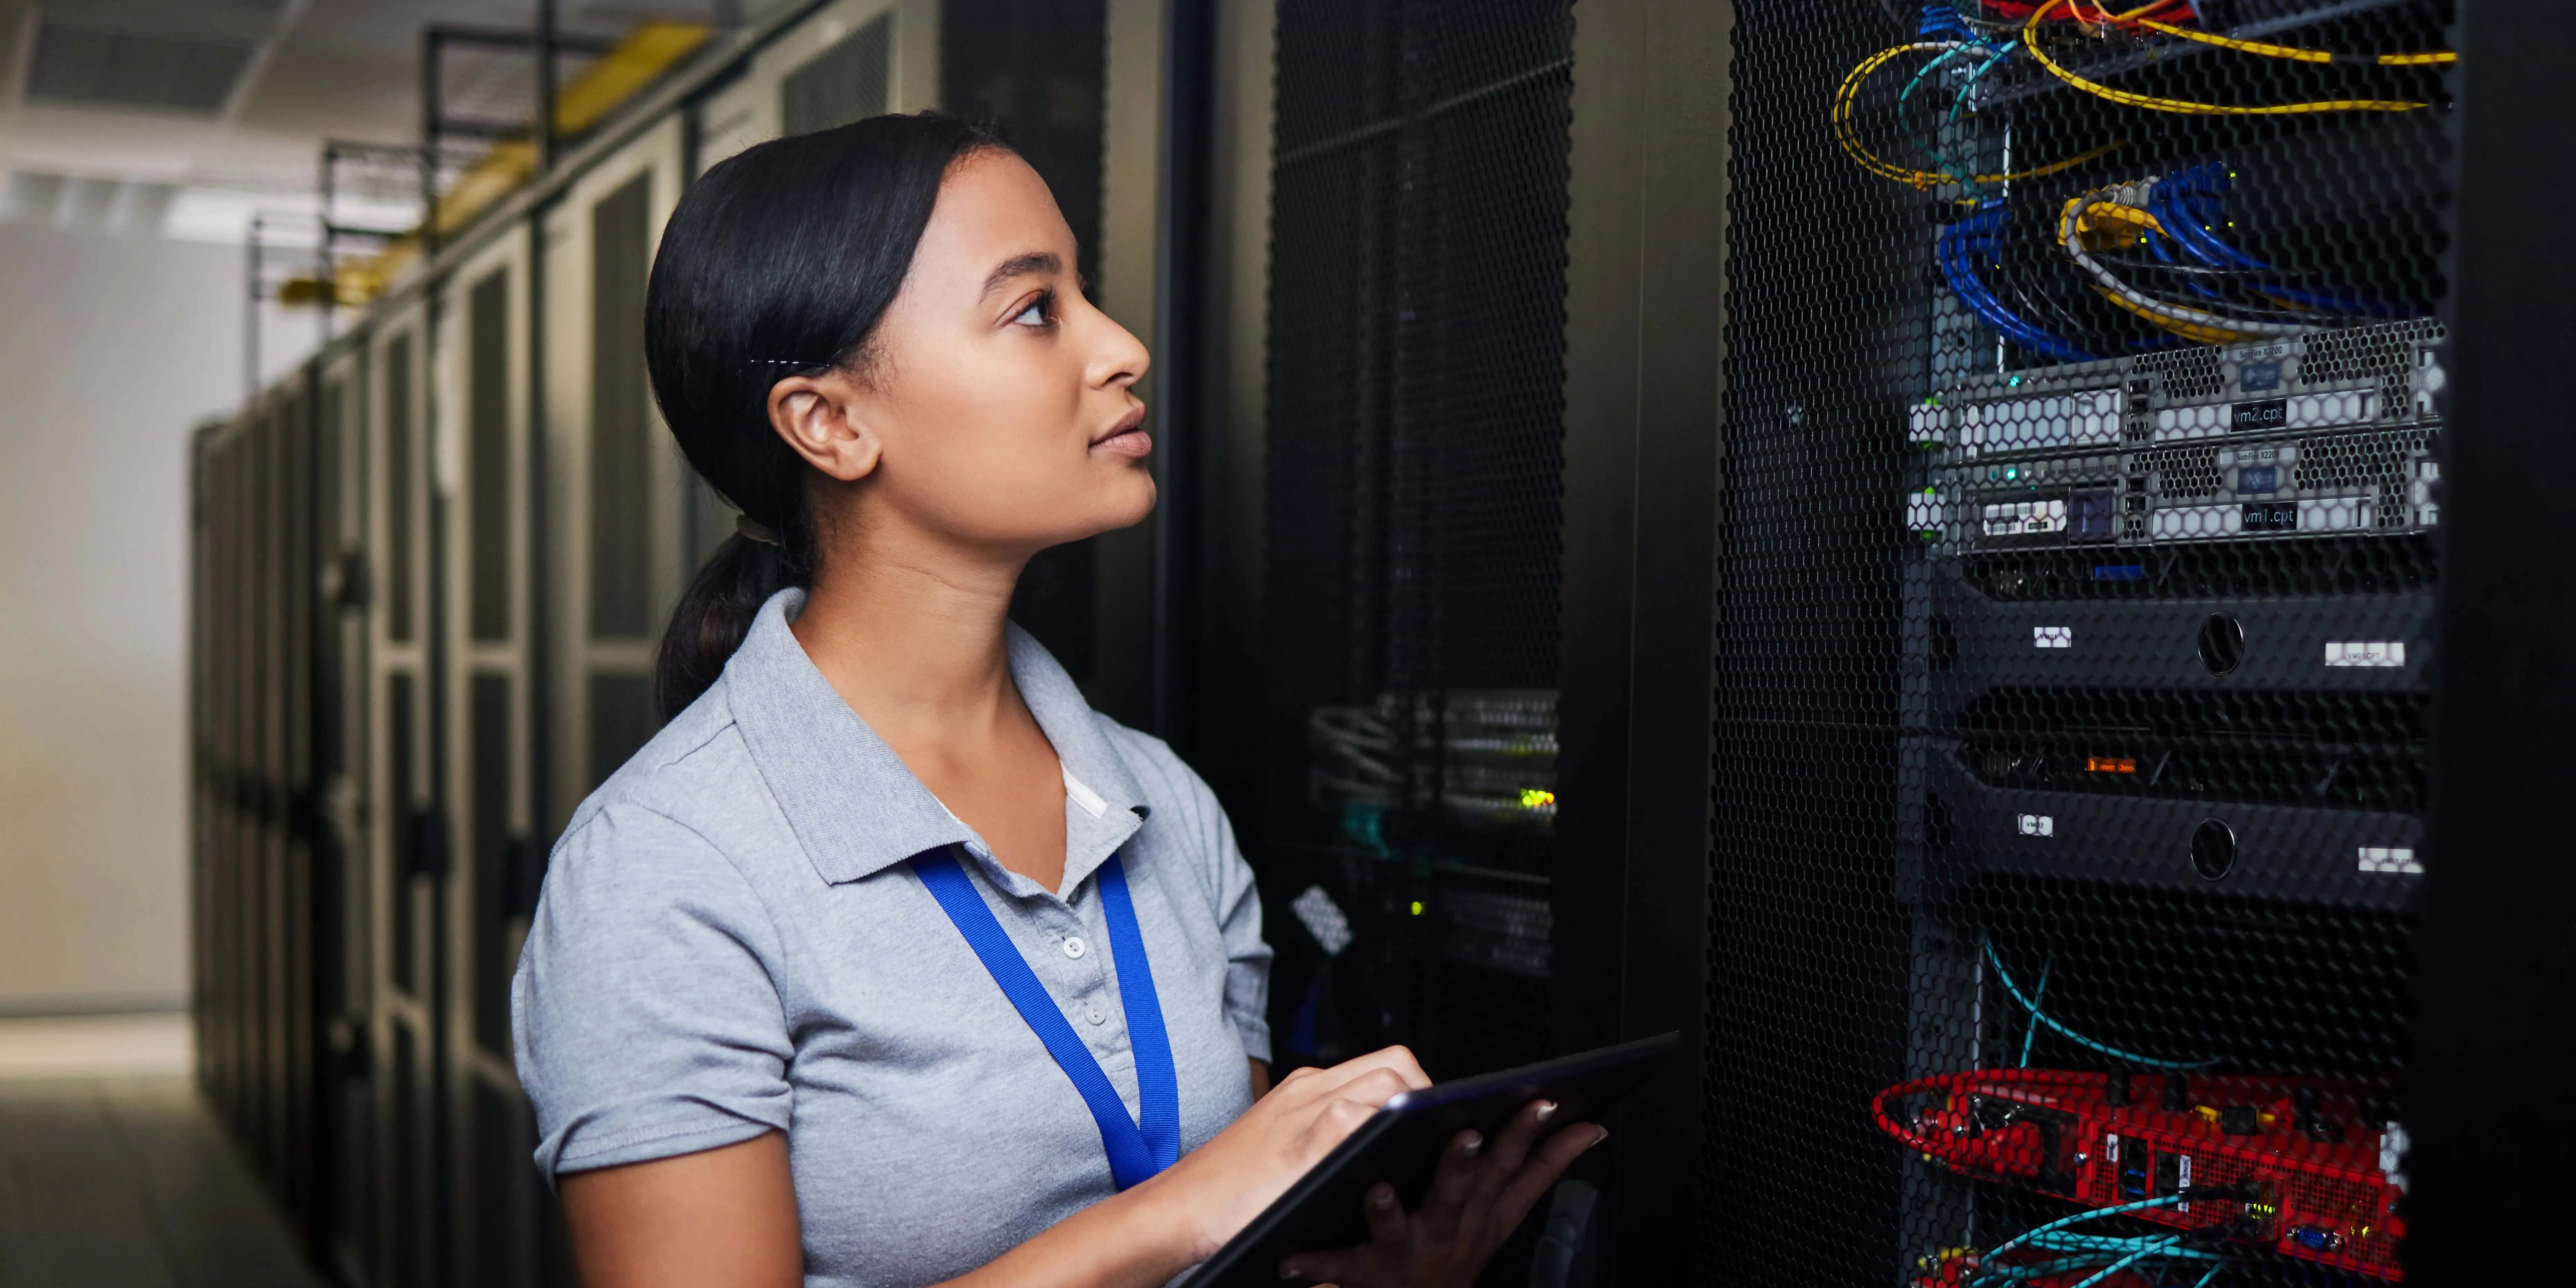 Woman engineer on a tablet in a server room